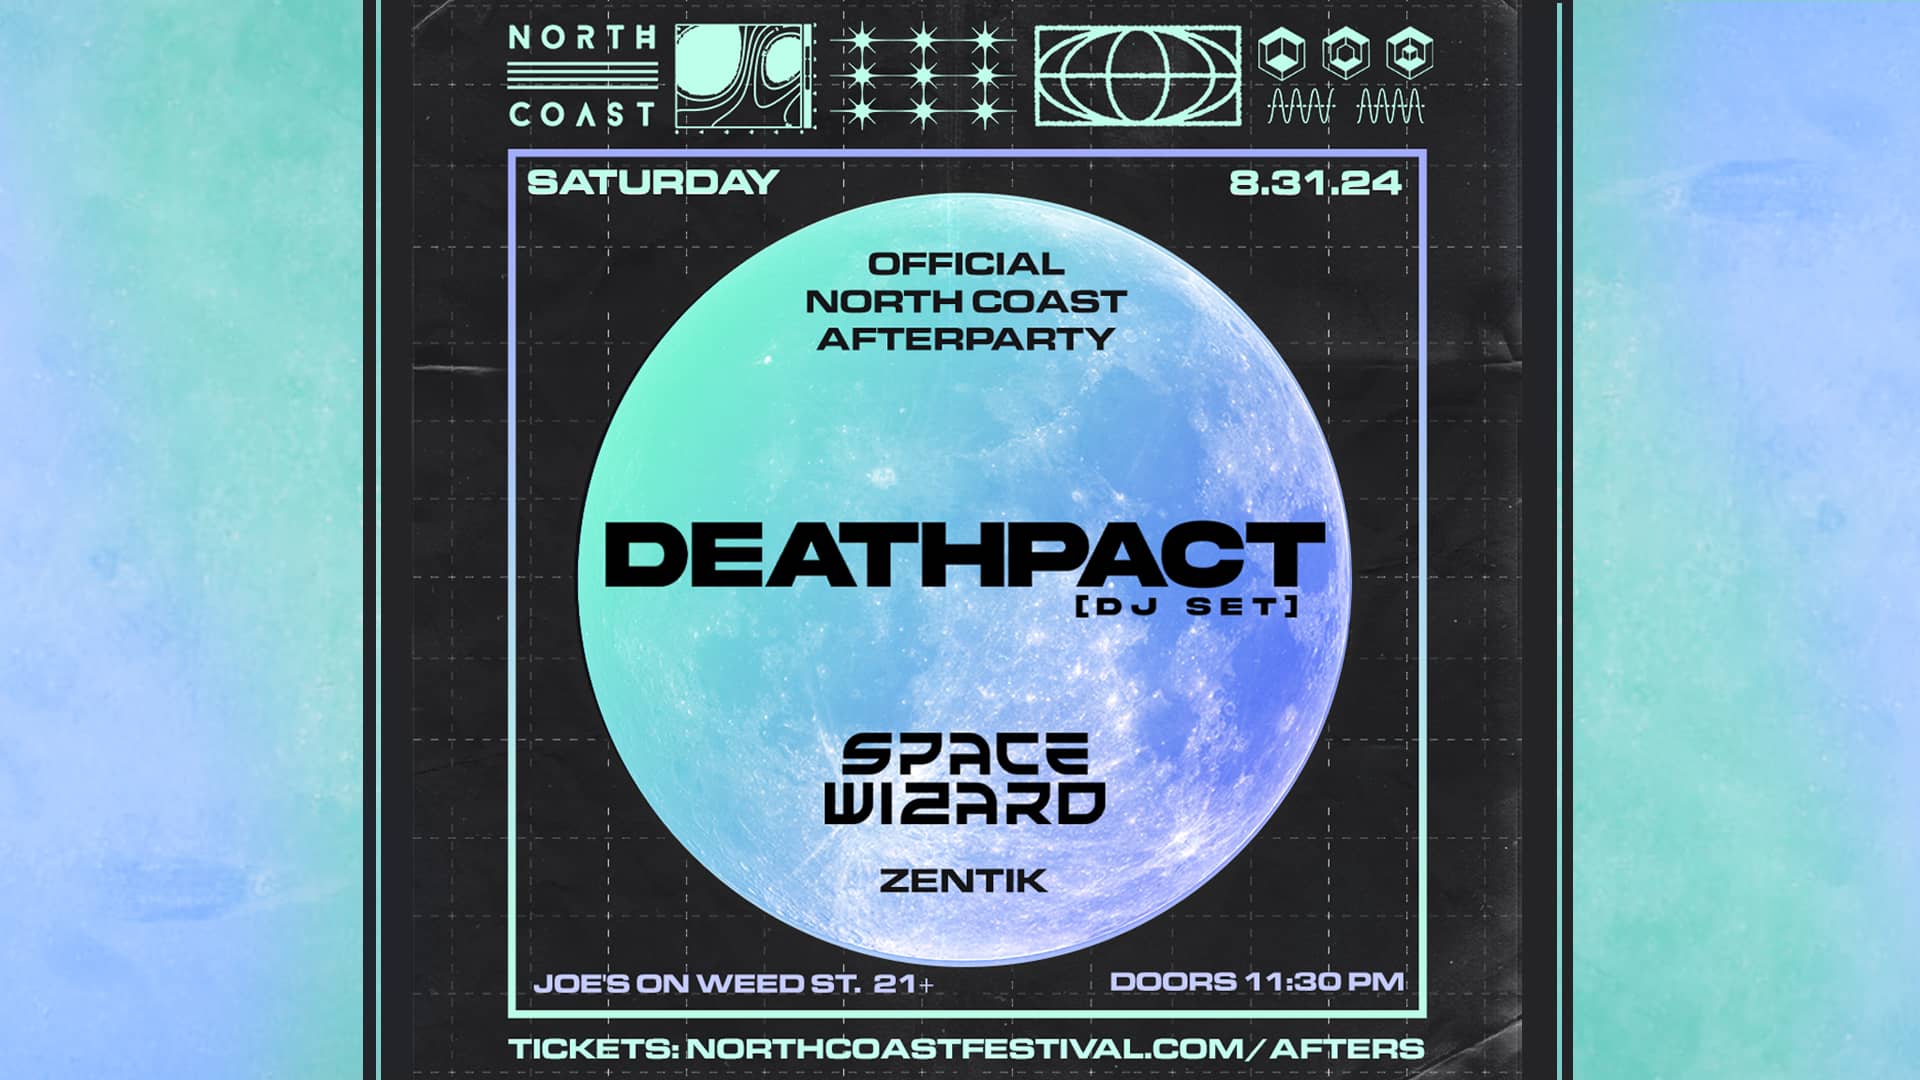 Poster for North Coast Night Lights, with Deathpact (DJ Set), presented by Collectiv & North Coast, with Space Wizard * Zentik, on August 31, 2024 at Joe's on Weed St.